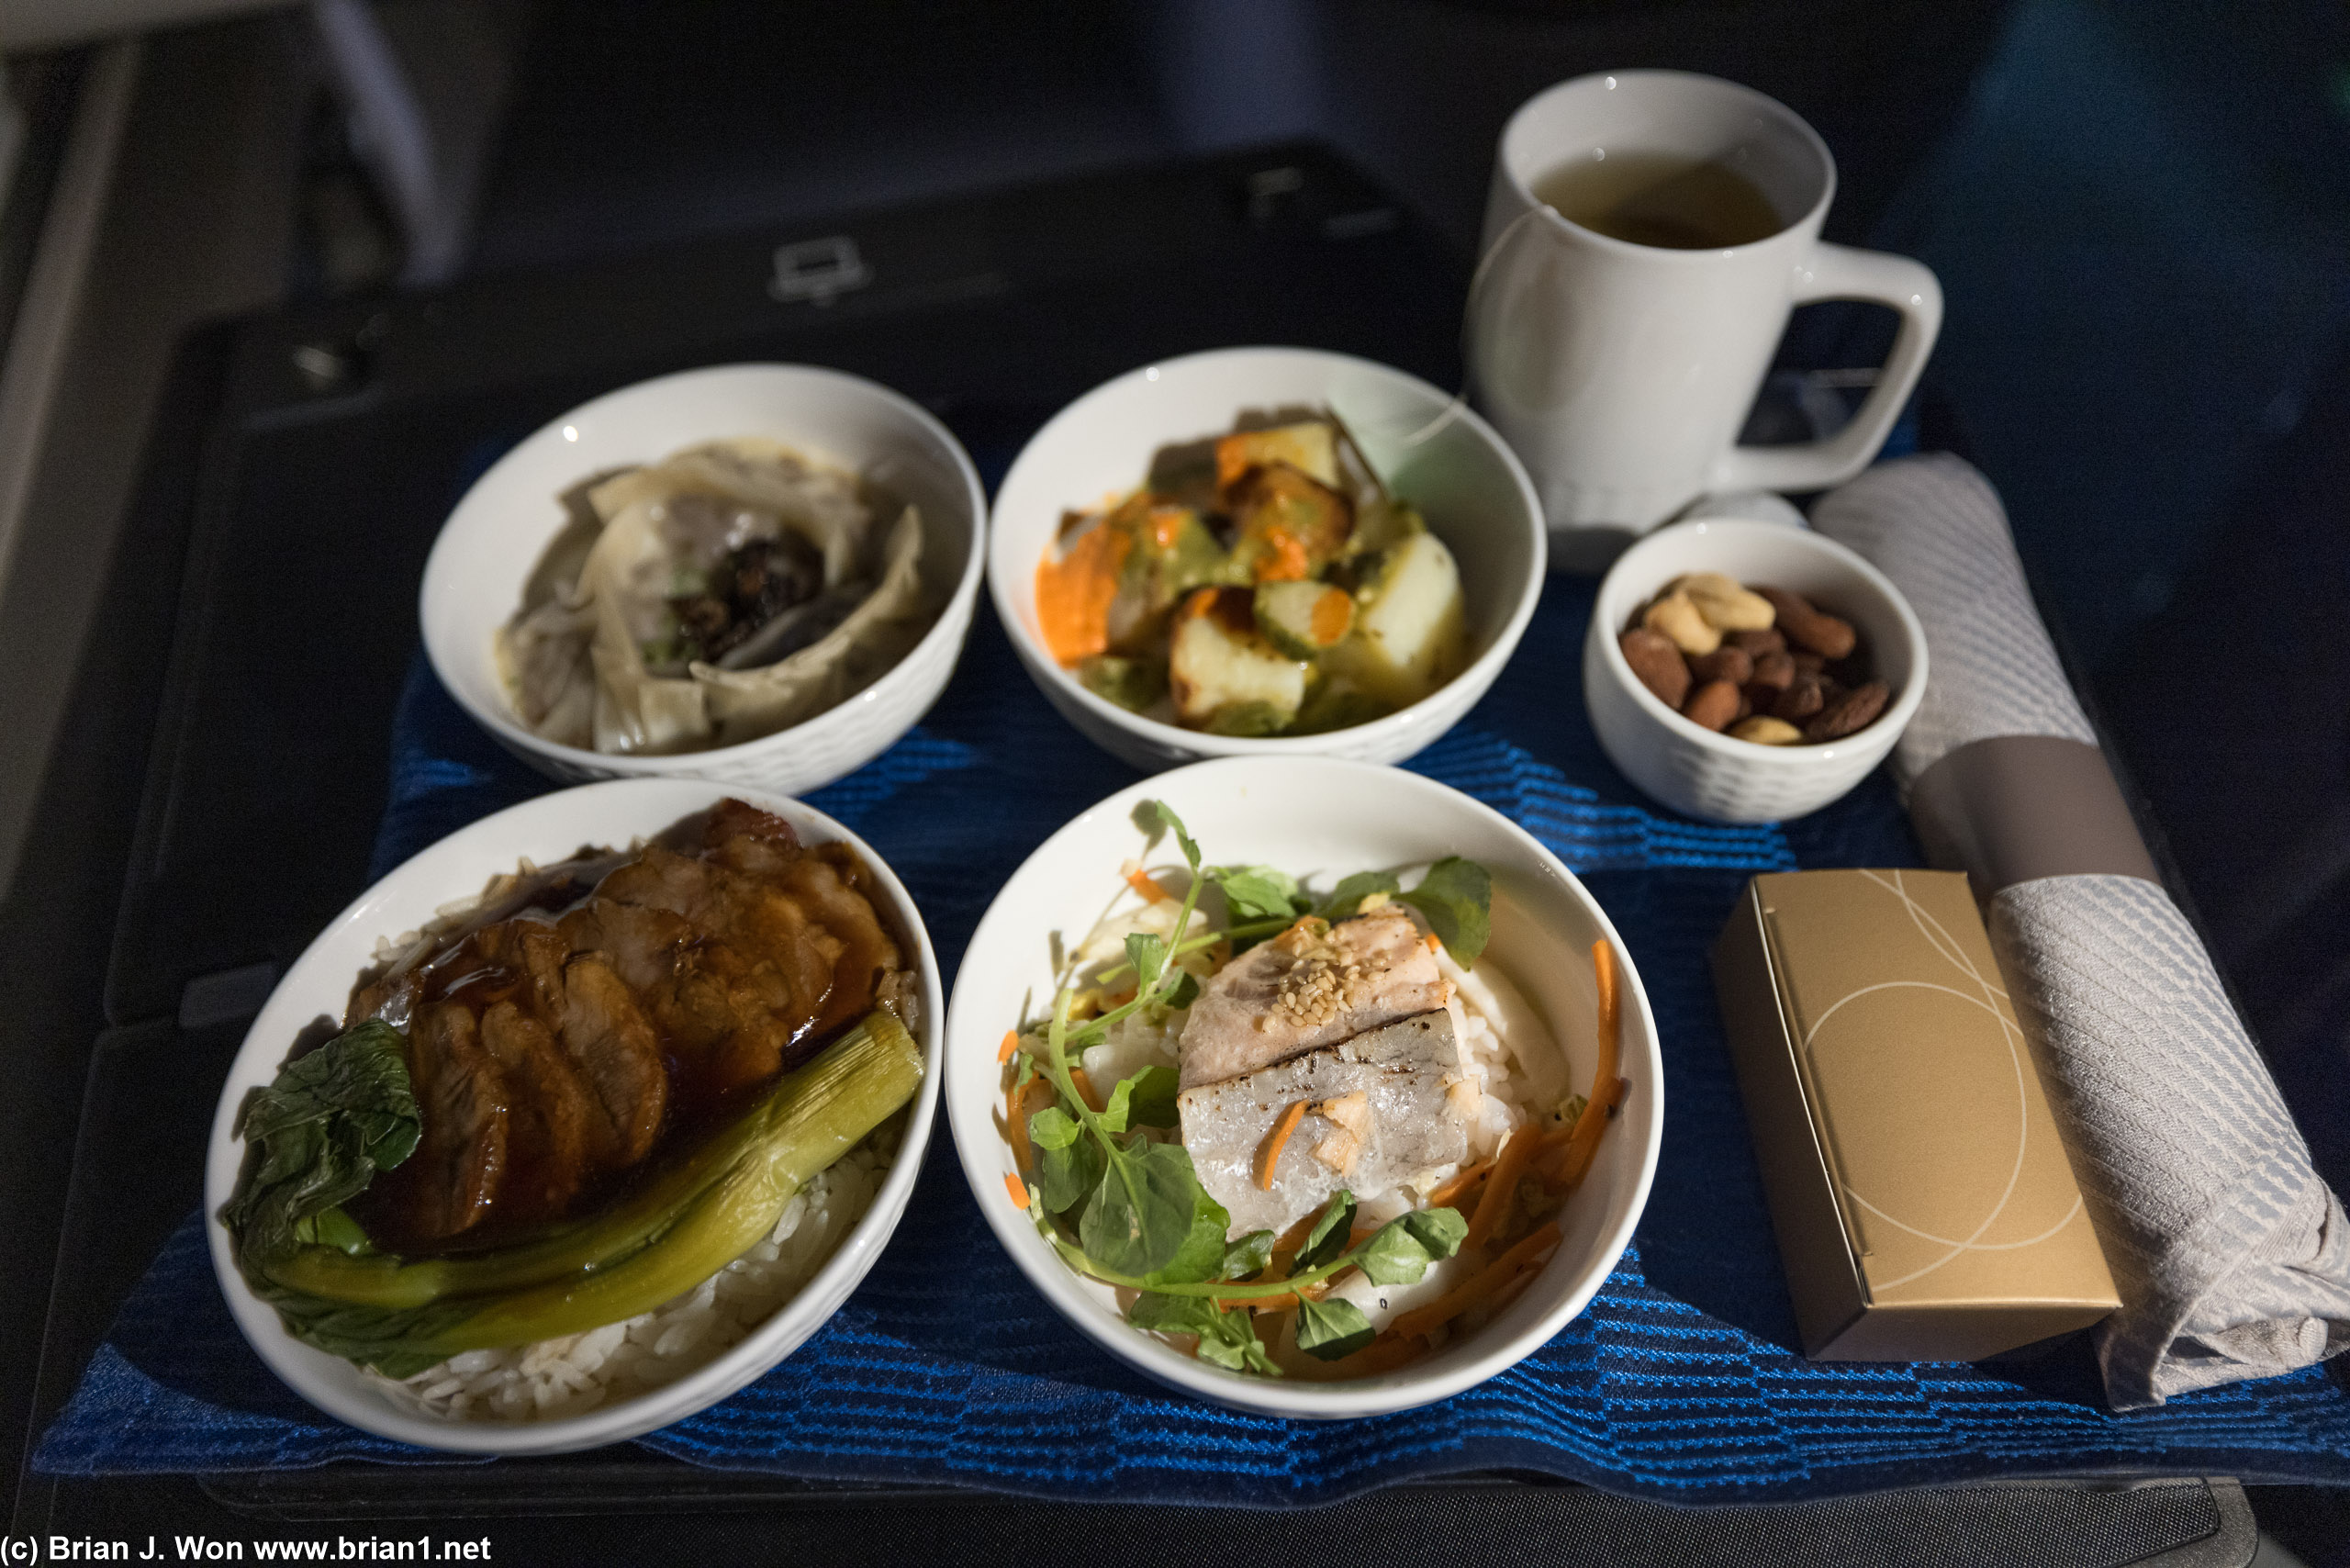 Mid-flight tapas is not bad, but felt like more food than dinner, especially with the pork and rice dish at bottom left.